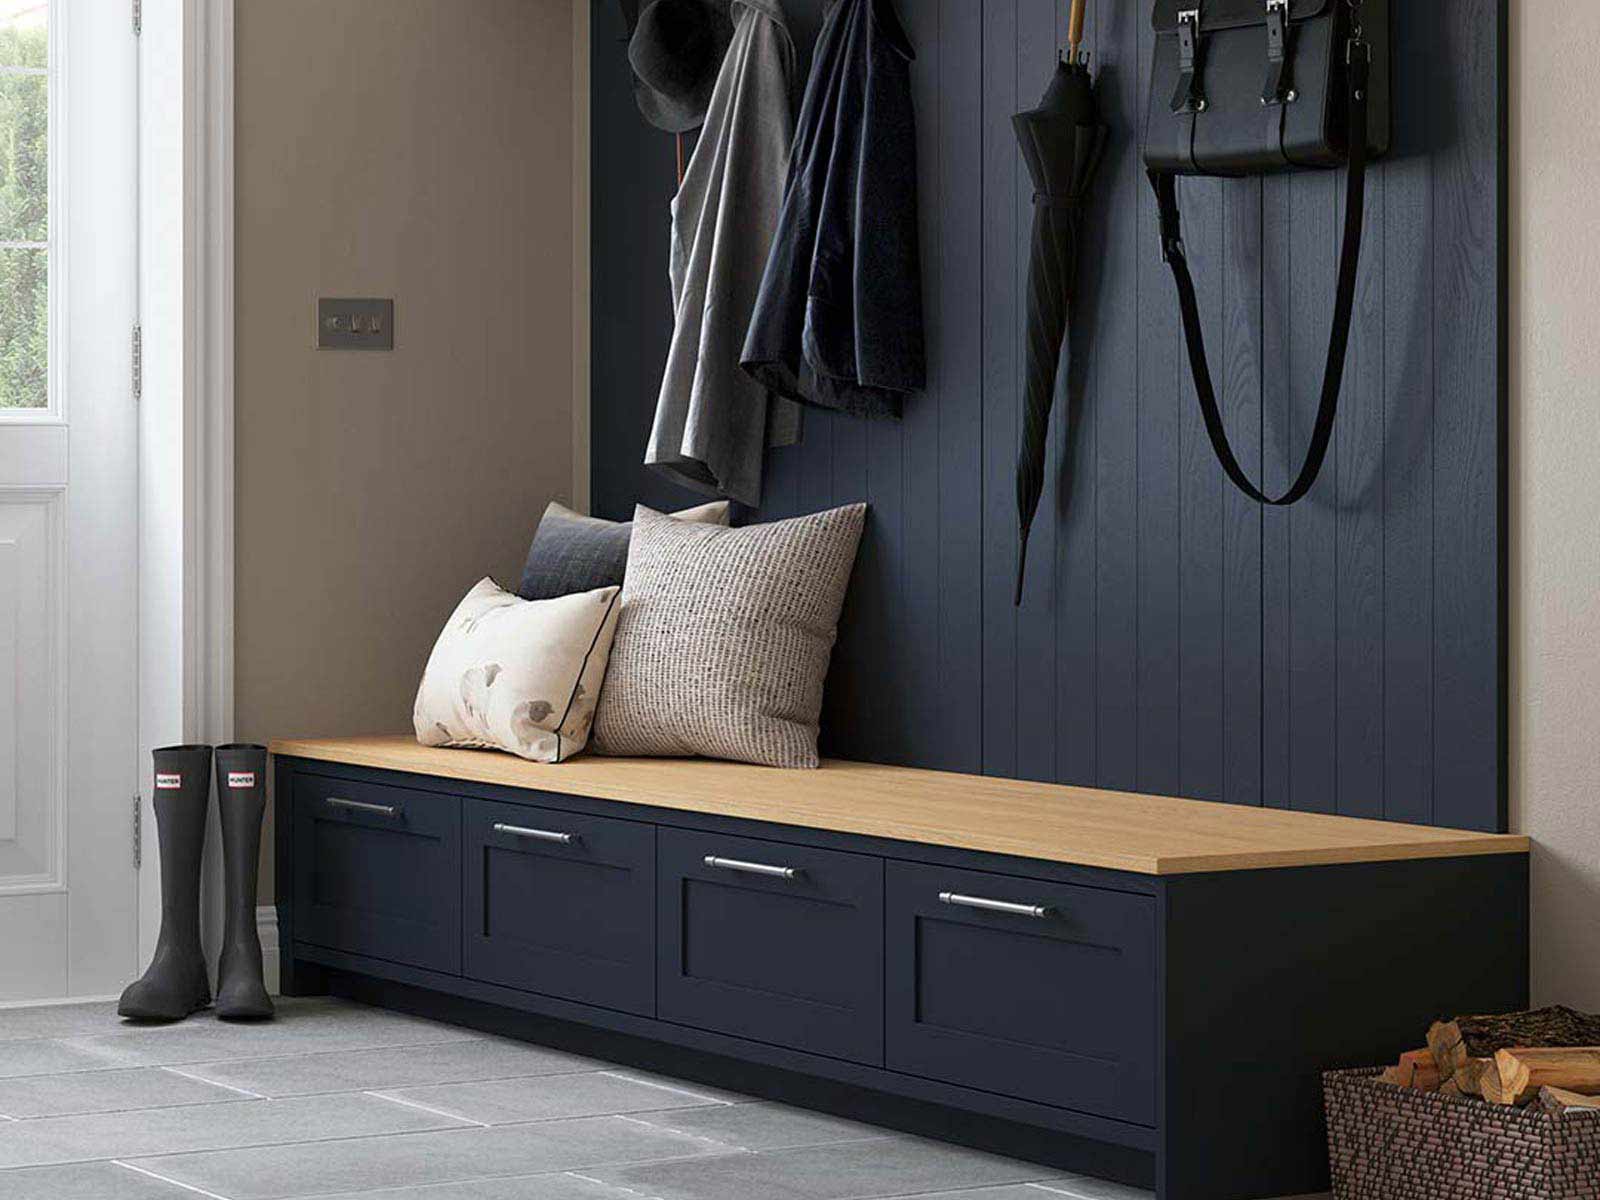 Utility room ideas featuring a bootility unit with dark blue doors